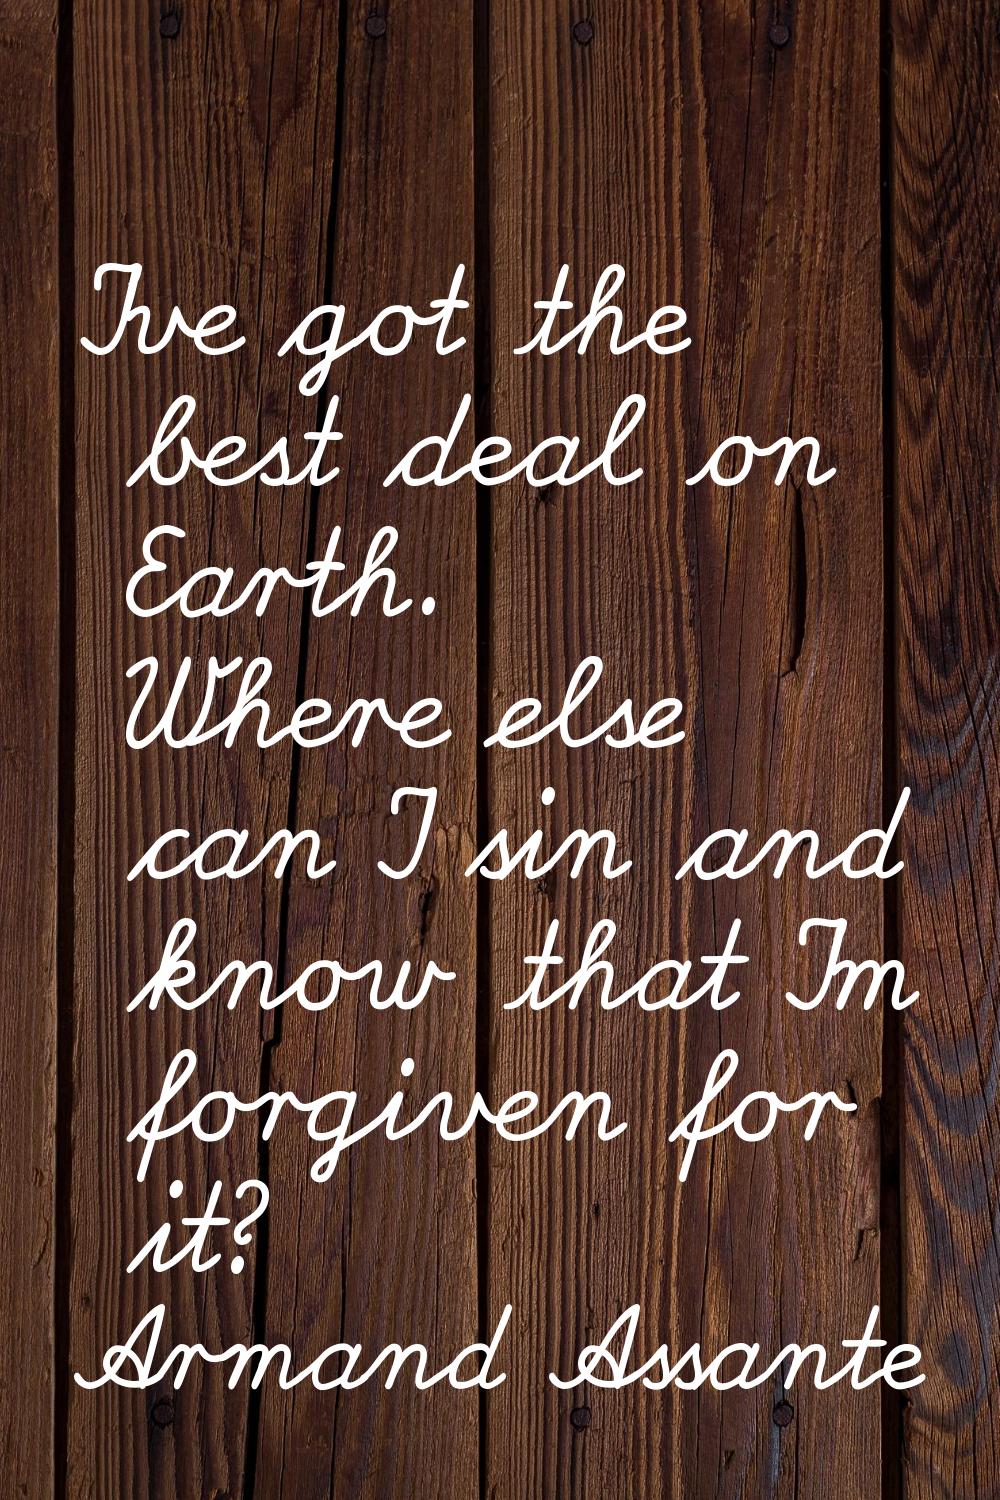 I've got the best deal on Earth. Where else can I sin and know that I'm forgiven for it?